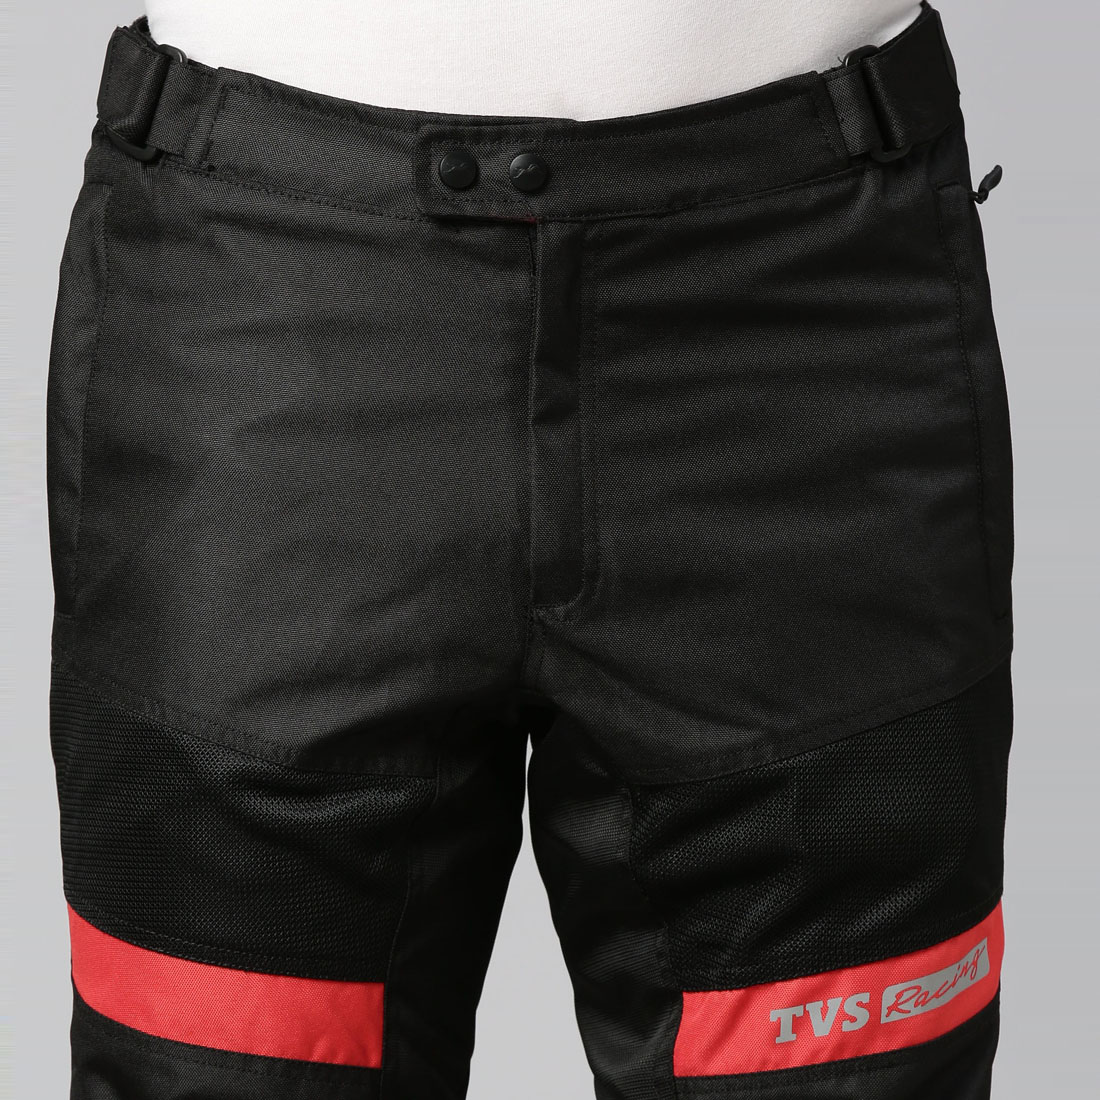  TVS Racing Riding Pant for Men: Pant for Men Biker with CE Level-2 Knee Armor, High-Abrasion Resistance, Day-Night Reflective Safety, Adjustable Comfort Fit, and Mesh for Ventilation (Black/Red-M)